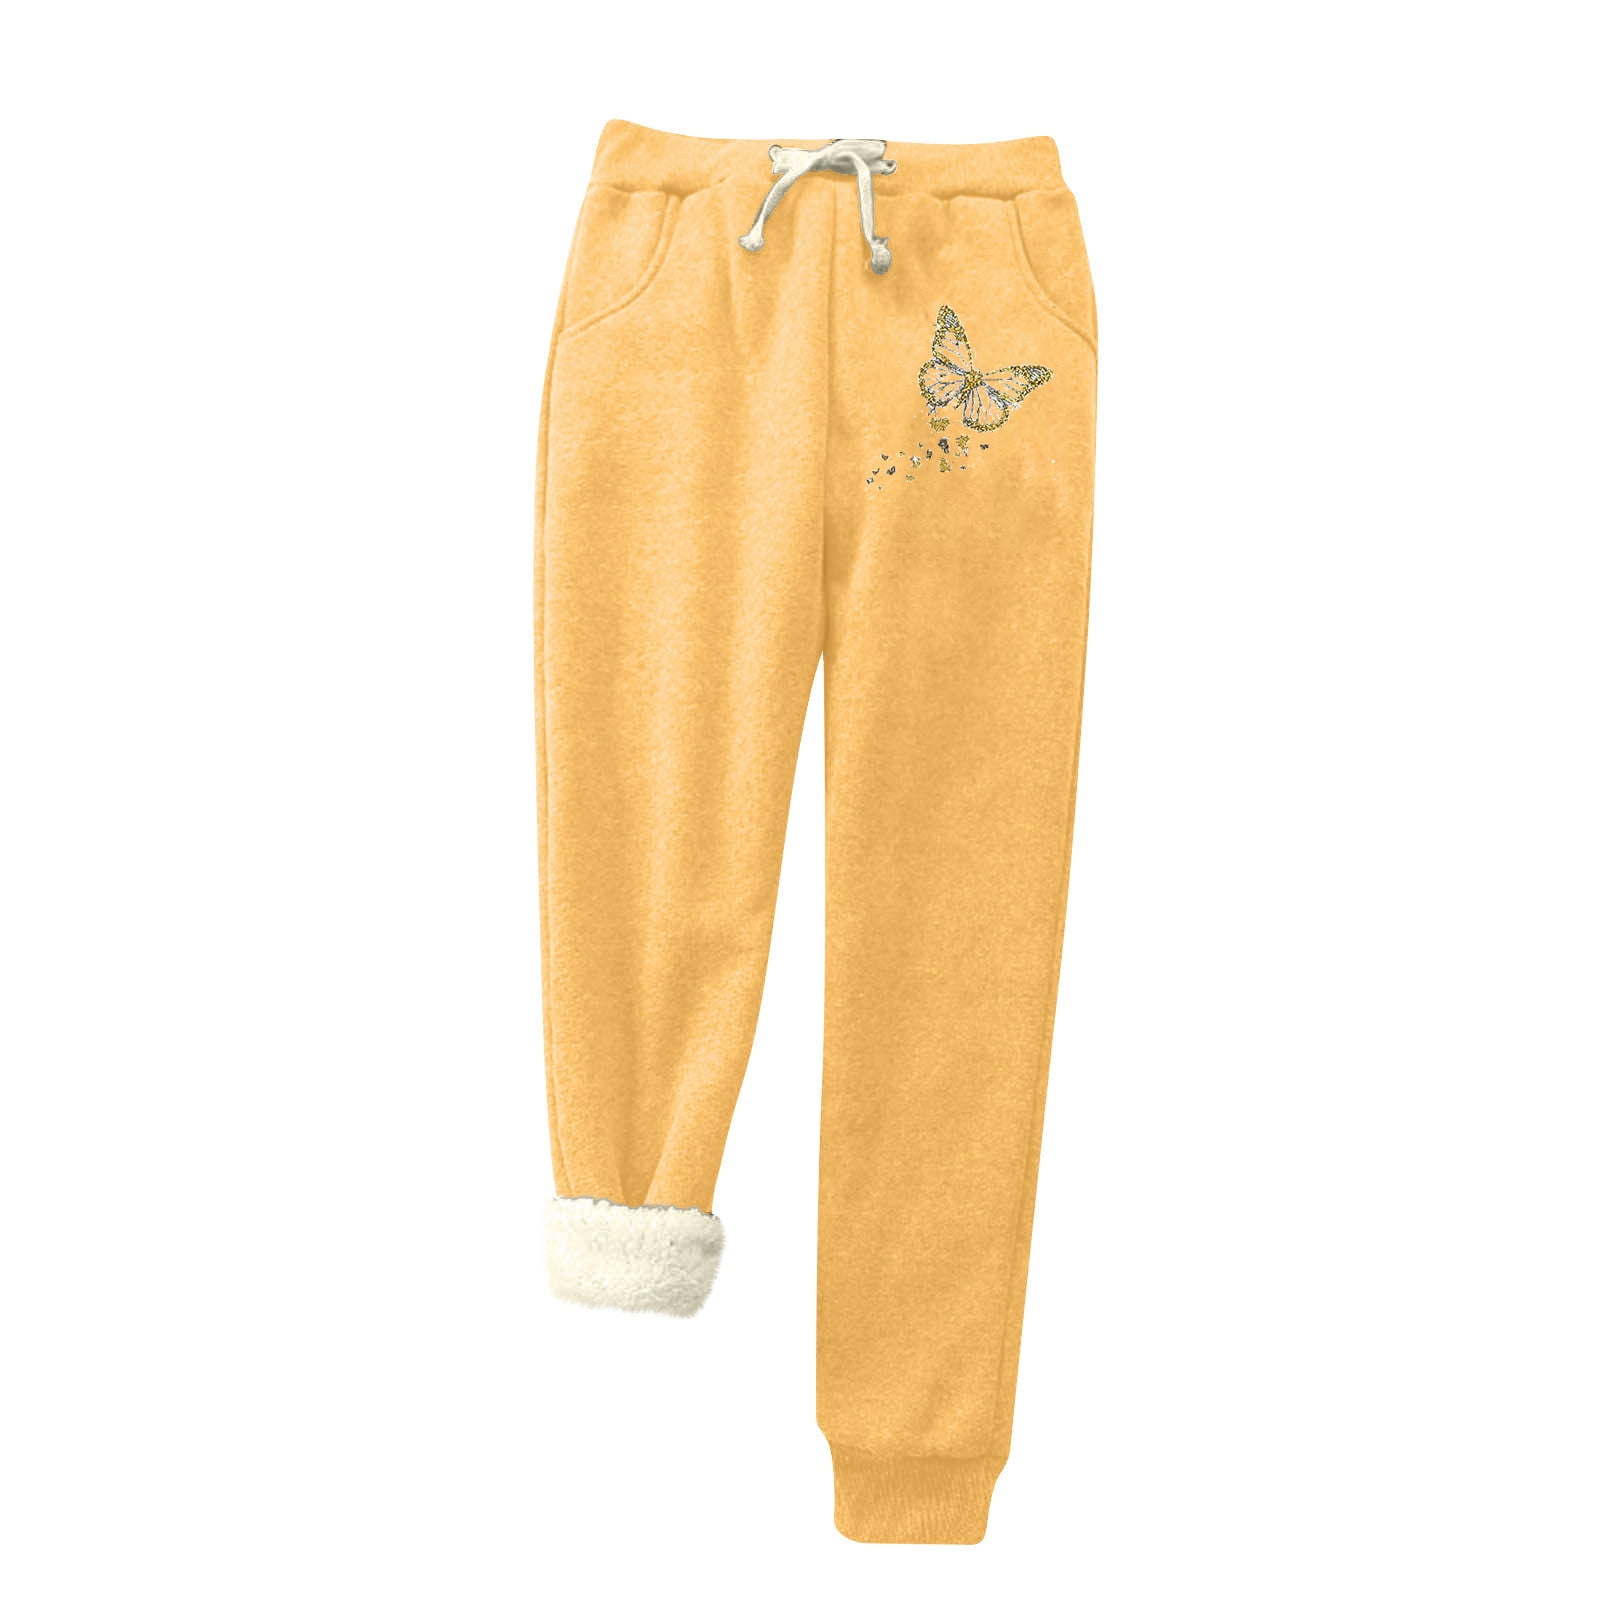 Women's Winter Warm Sherpa Lined Sweatpants Drawstring Elastic High Waisted Athletic  Jogger Fleece Pants with Pockets A1 - Walmart.com